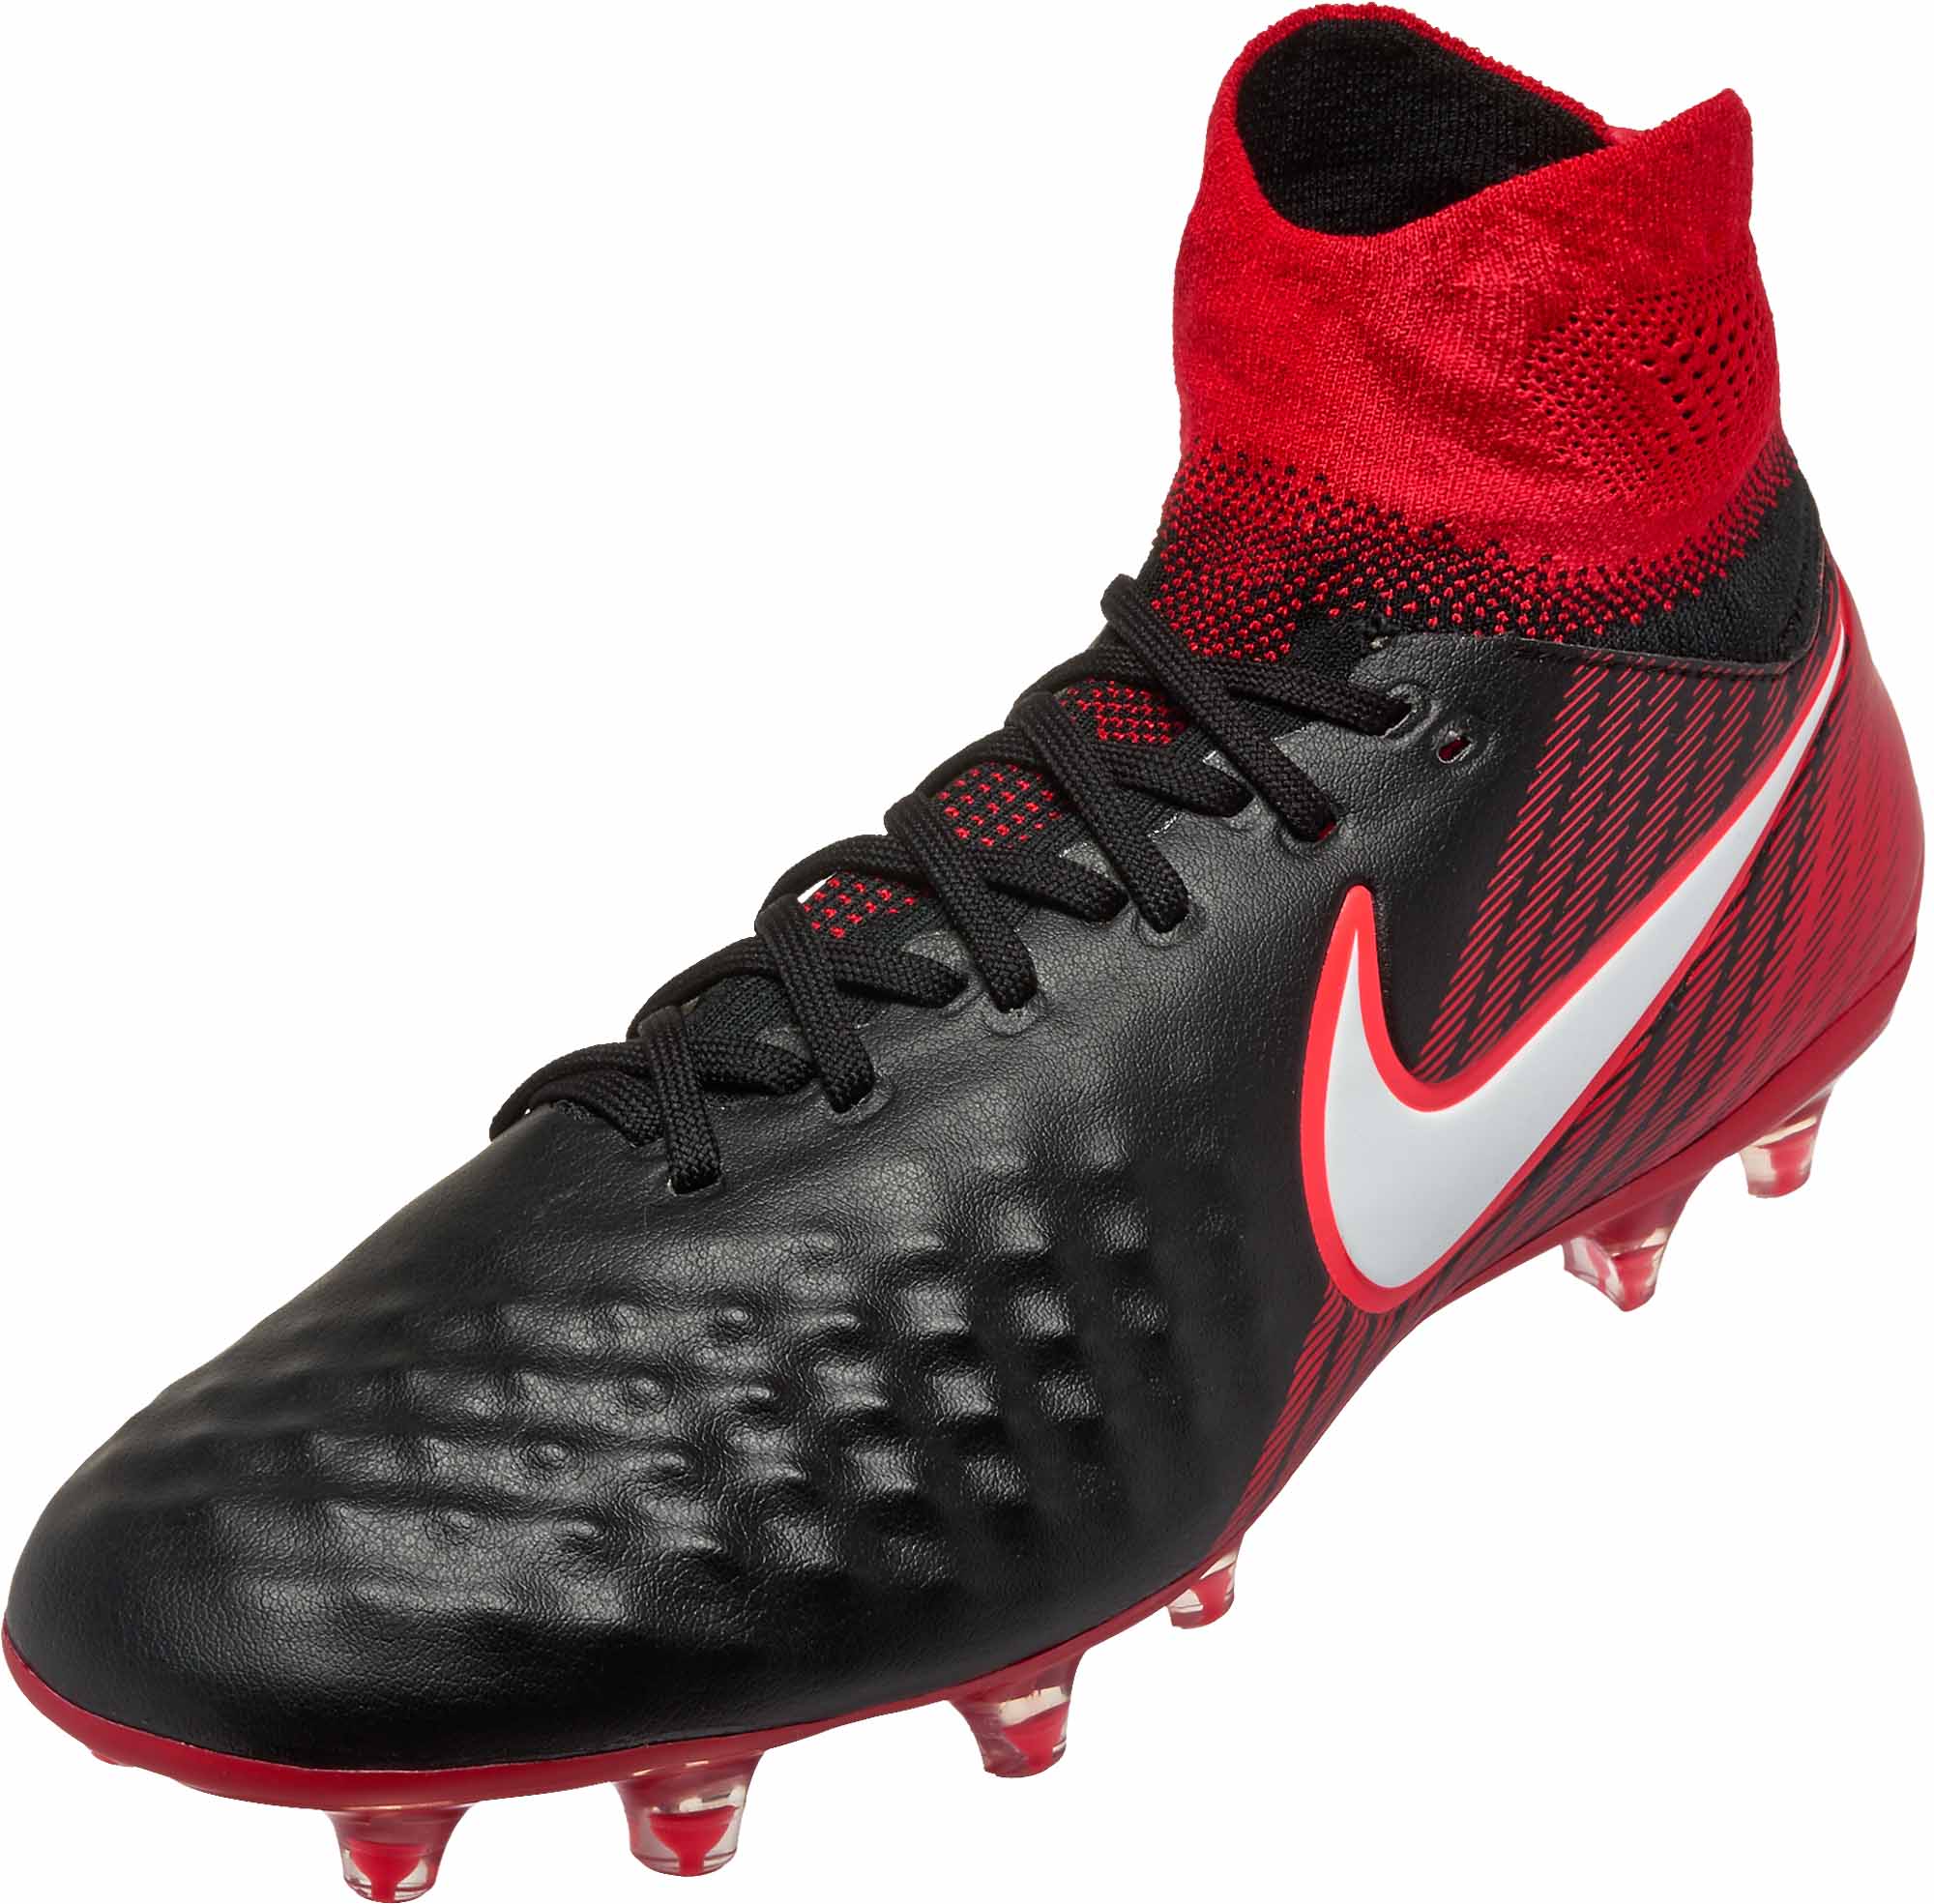 nike magista black and red